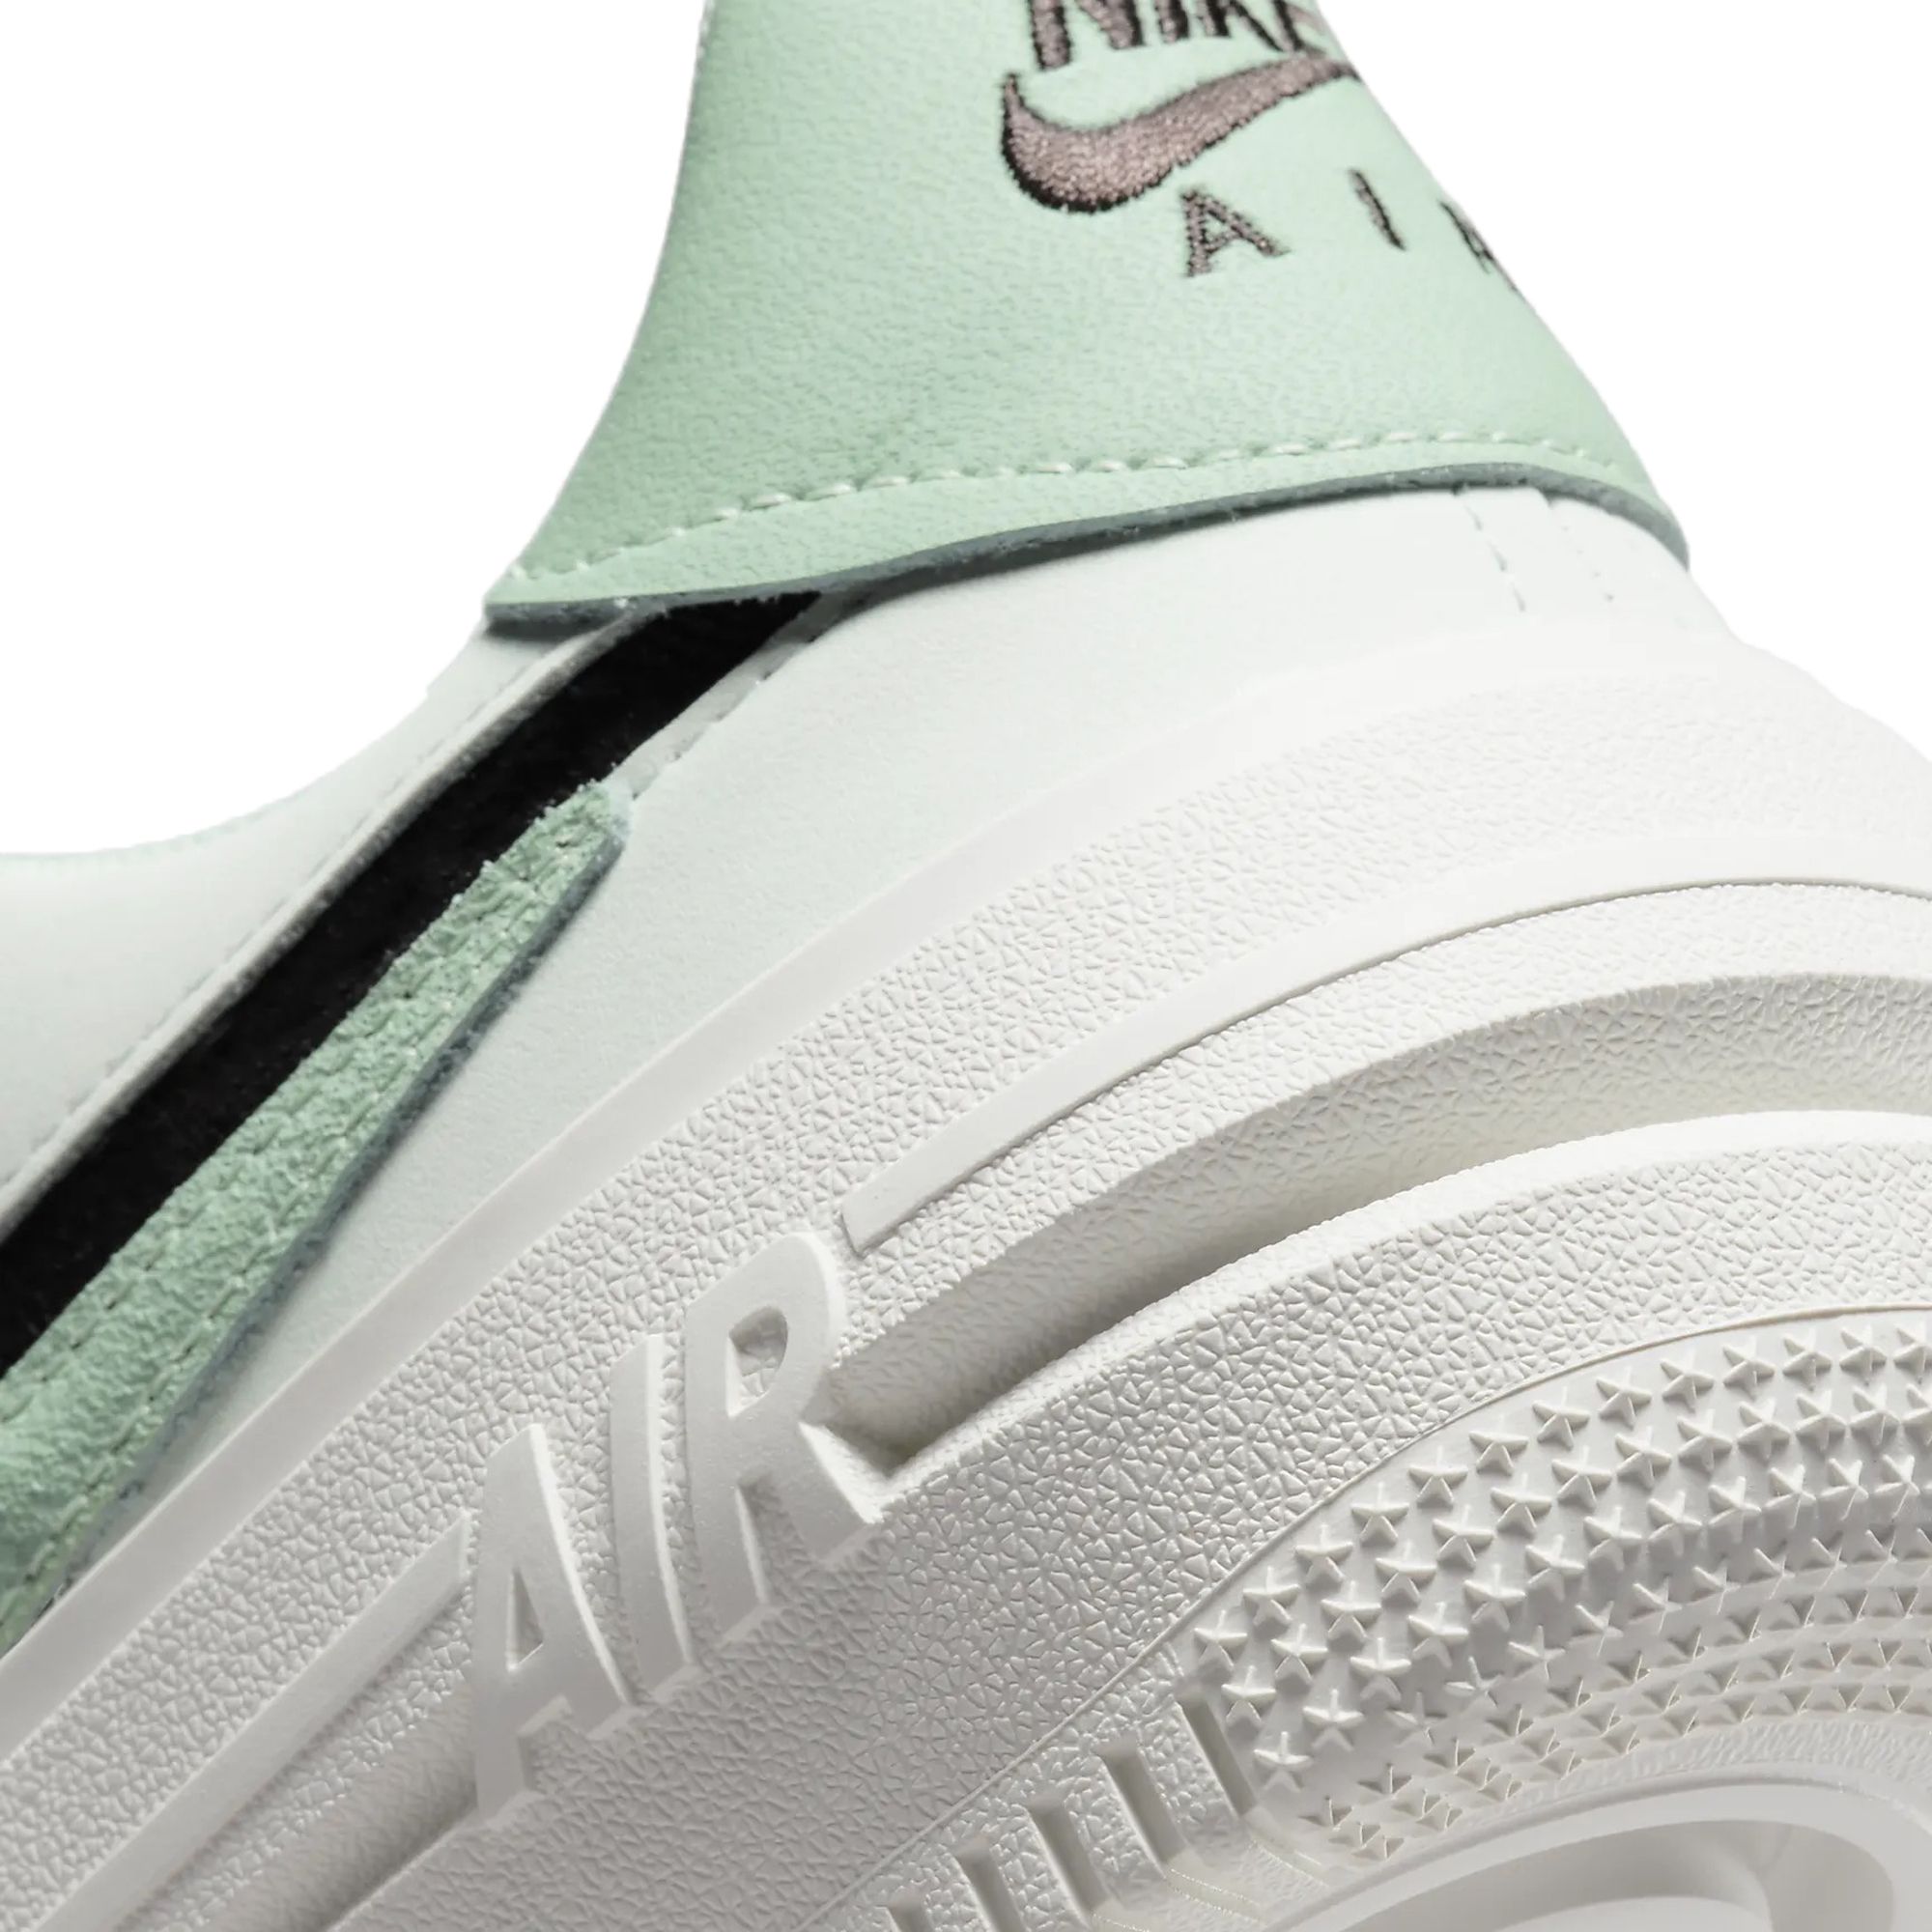 Nike Air Force 1 PLT.AF.ORM Barely Green (Women's) - DX3730-300 - US